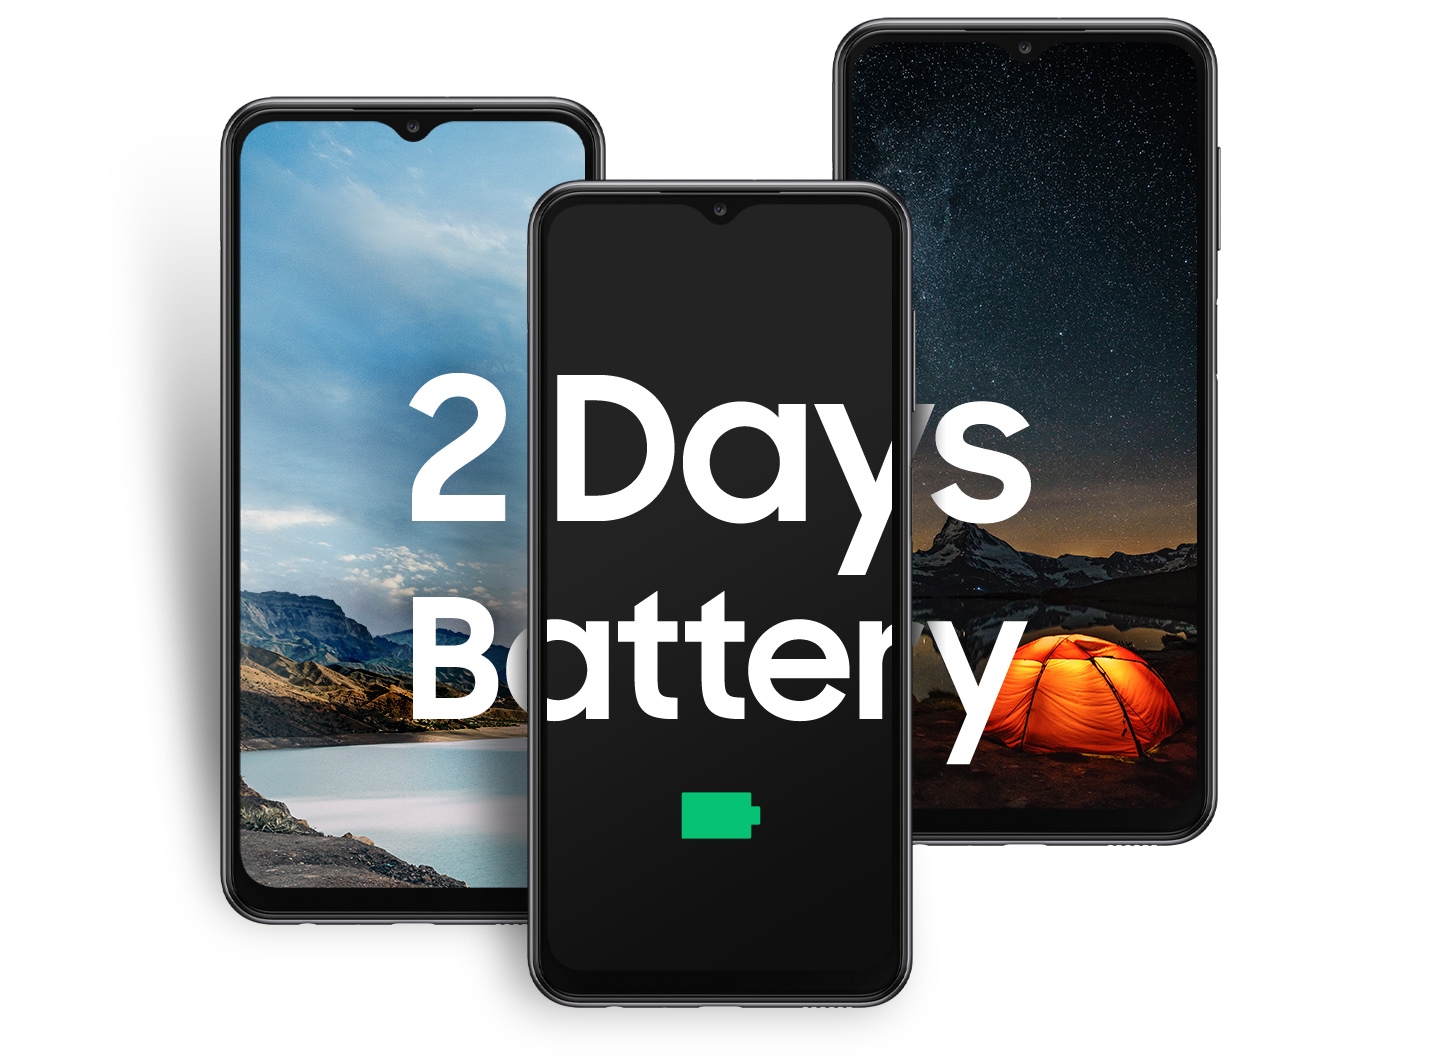 n africa feature awesome battery lasts two days 531658648?$FB TYPE A JPG$